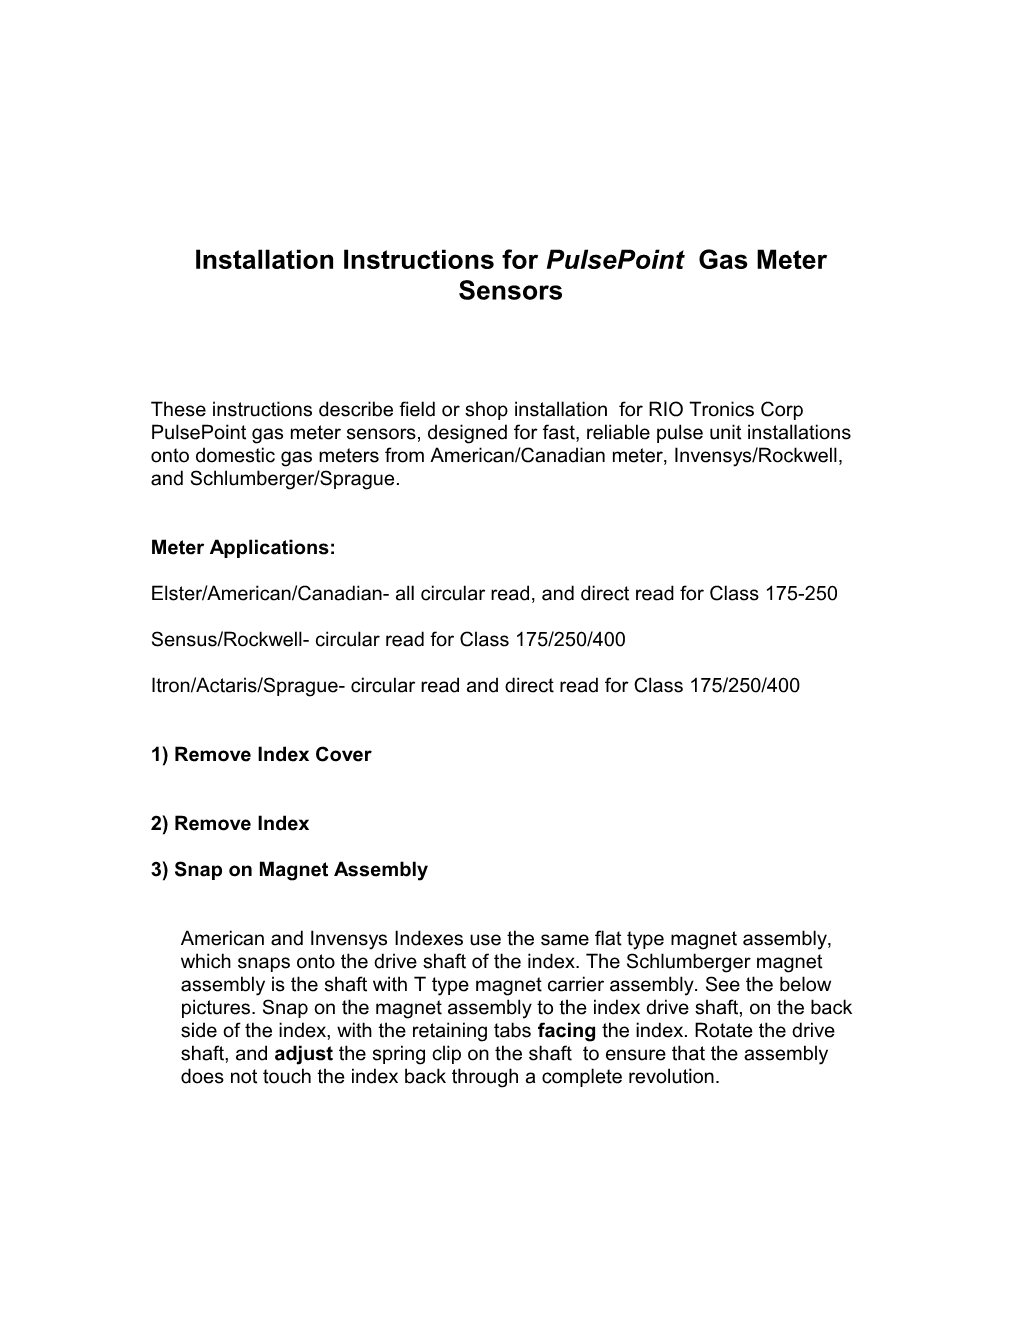 Installation Instructions for Pulsepoint Gas Meter Sensors